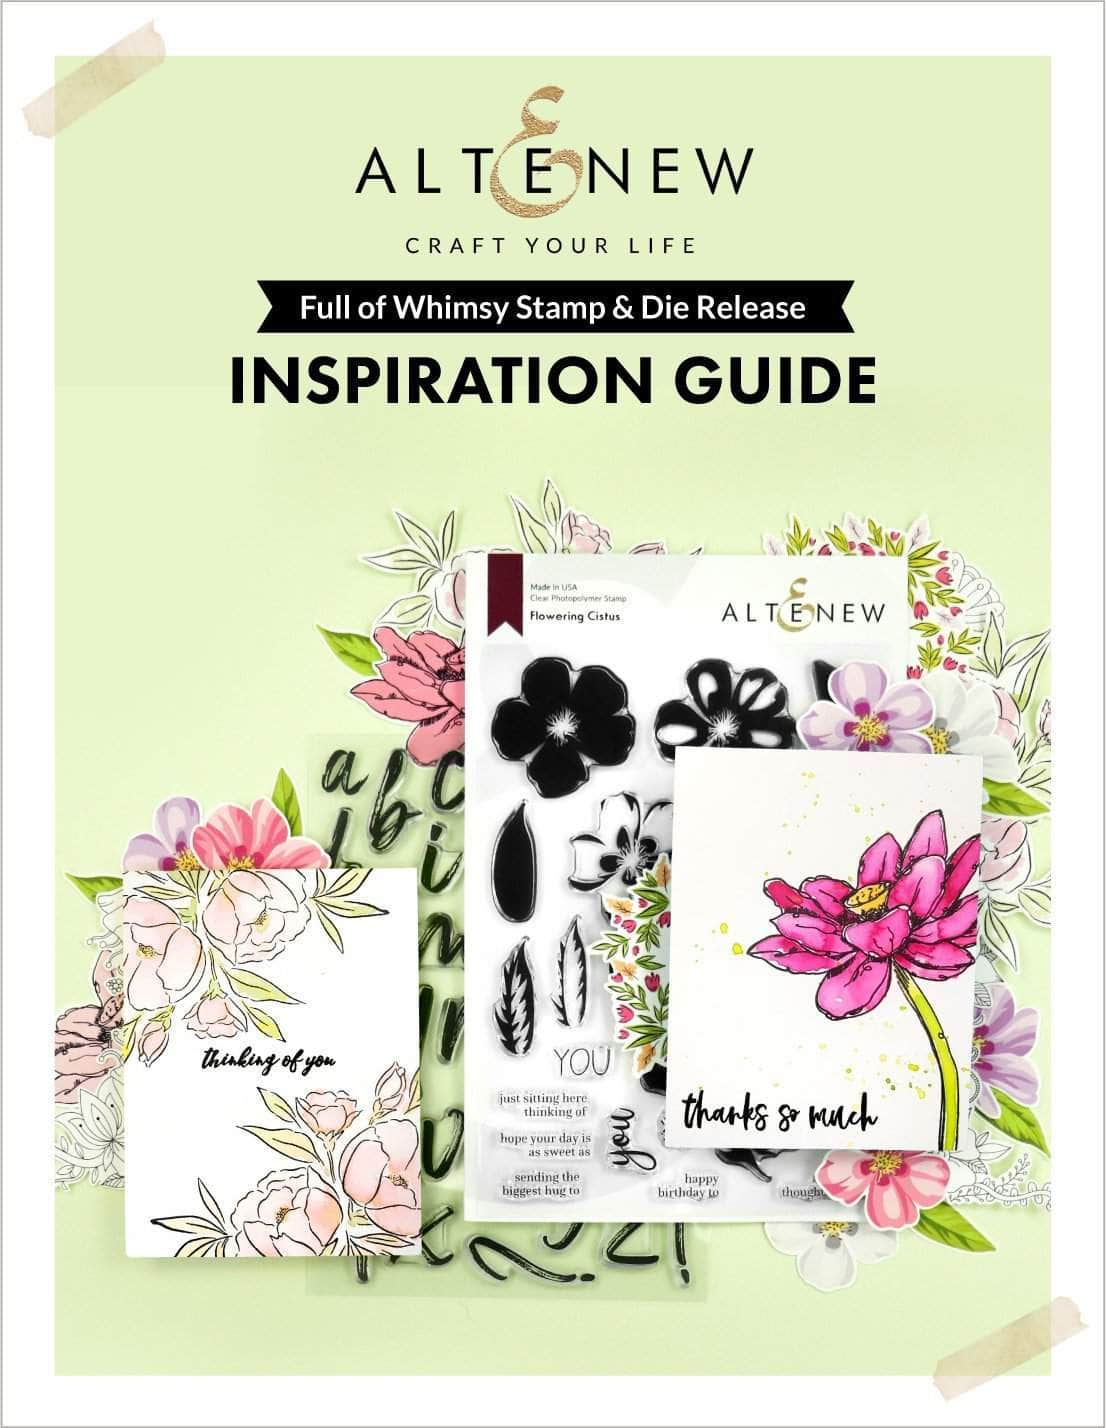 Printed Media Full of Whimsy Stamp & Die Release Inspiration Guide